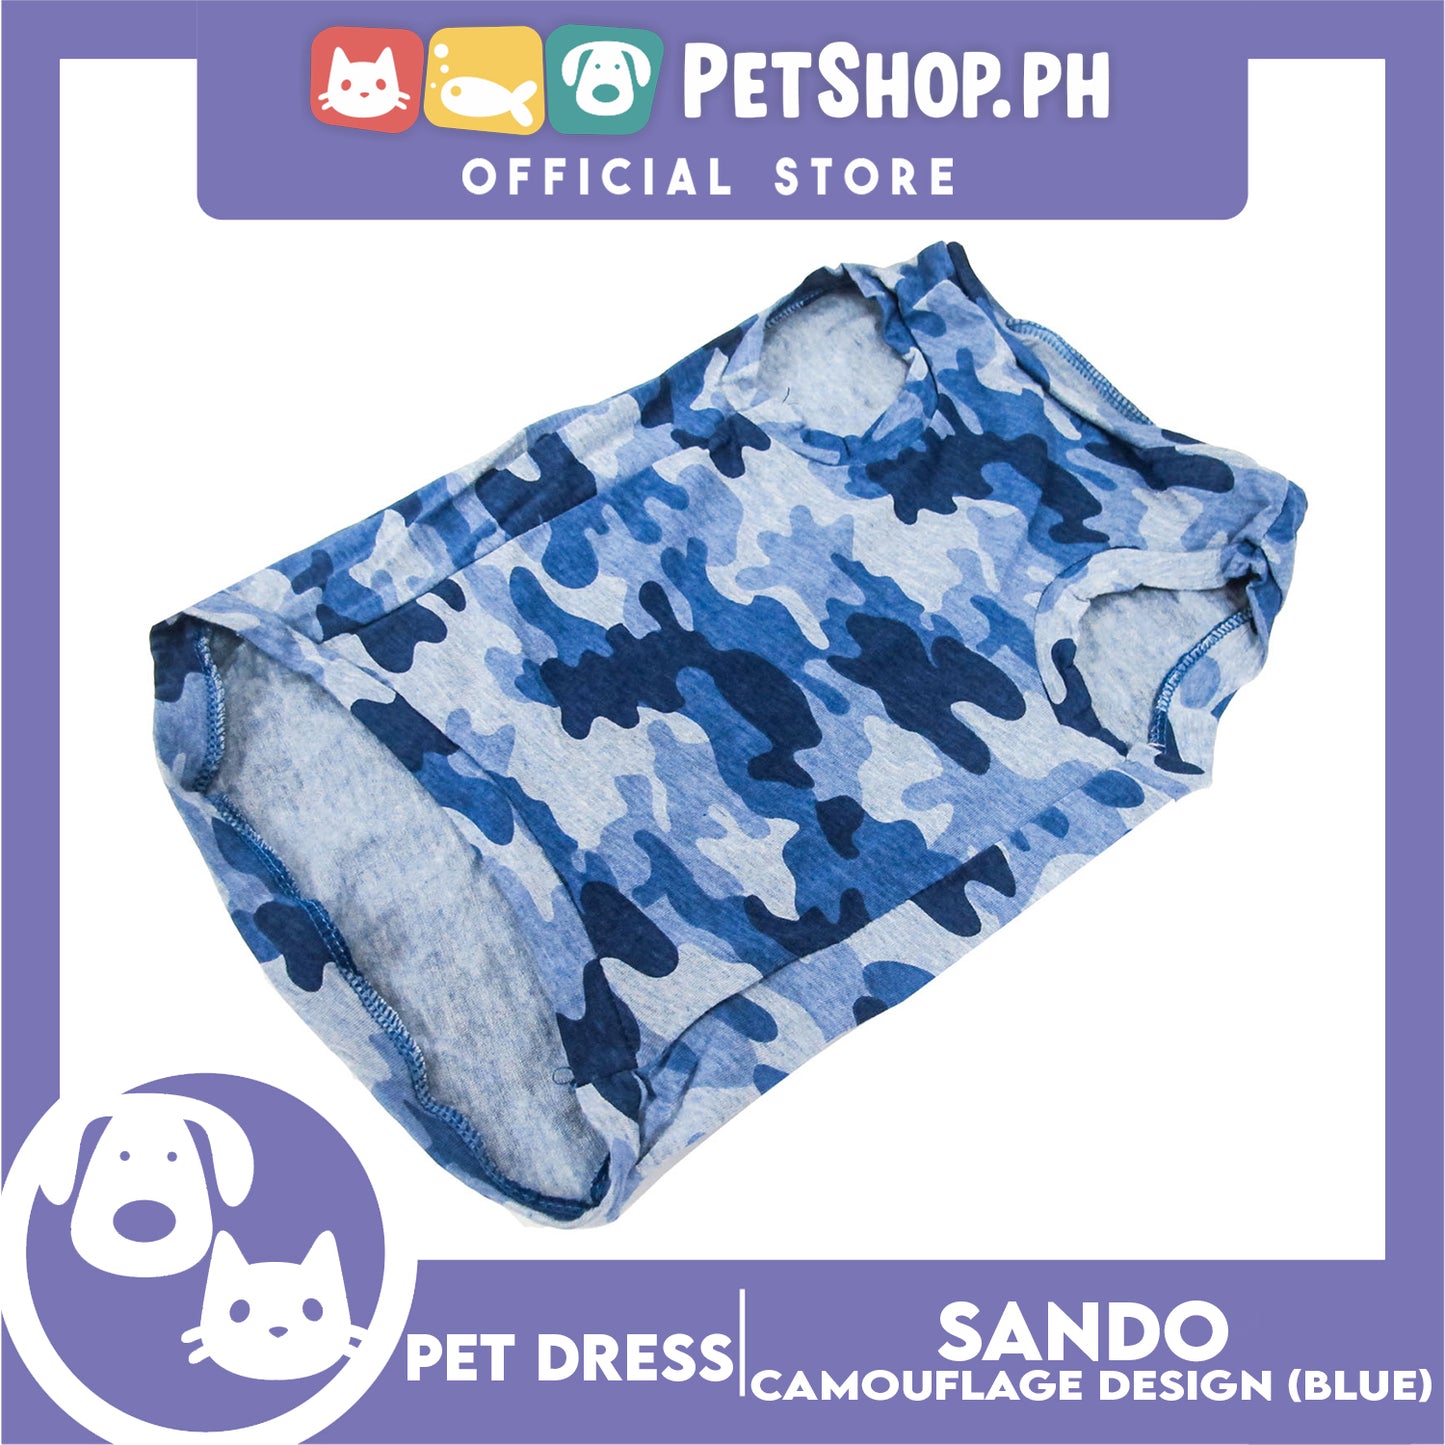 Pet Shirt Camouflage Design Sleeveless Blue (XL) for Puppy, Small Dogs and Cats- Sando Breathable Clothes, Pet T-shirt